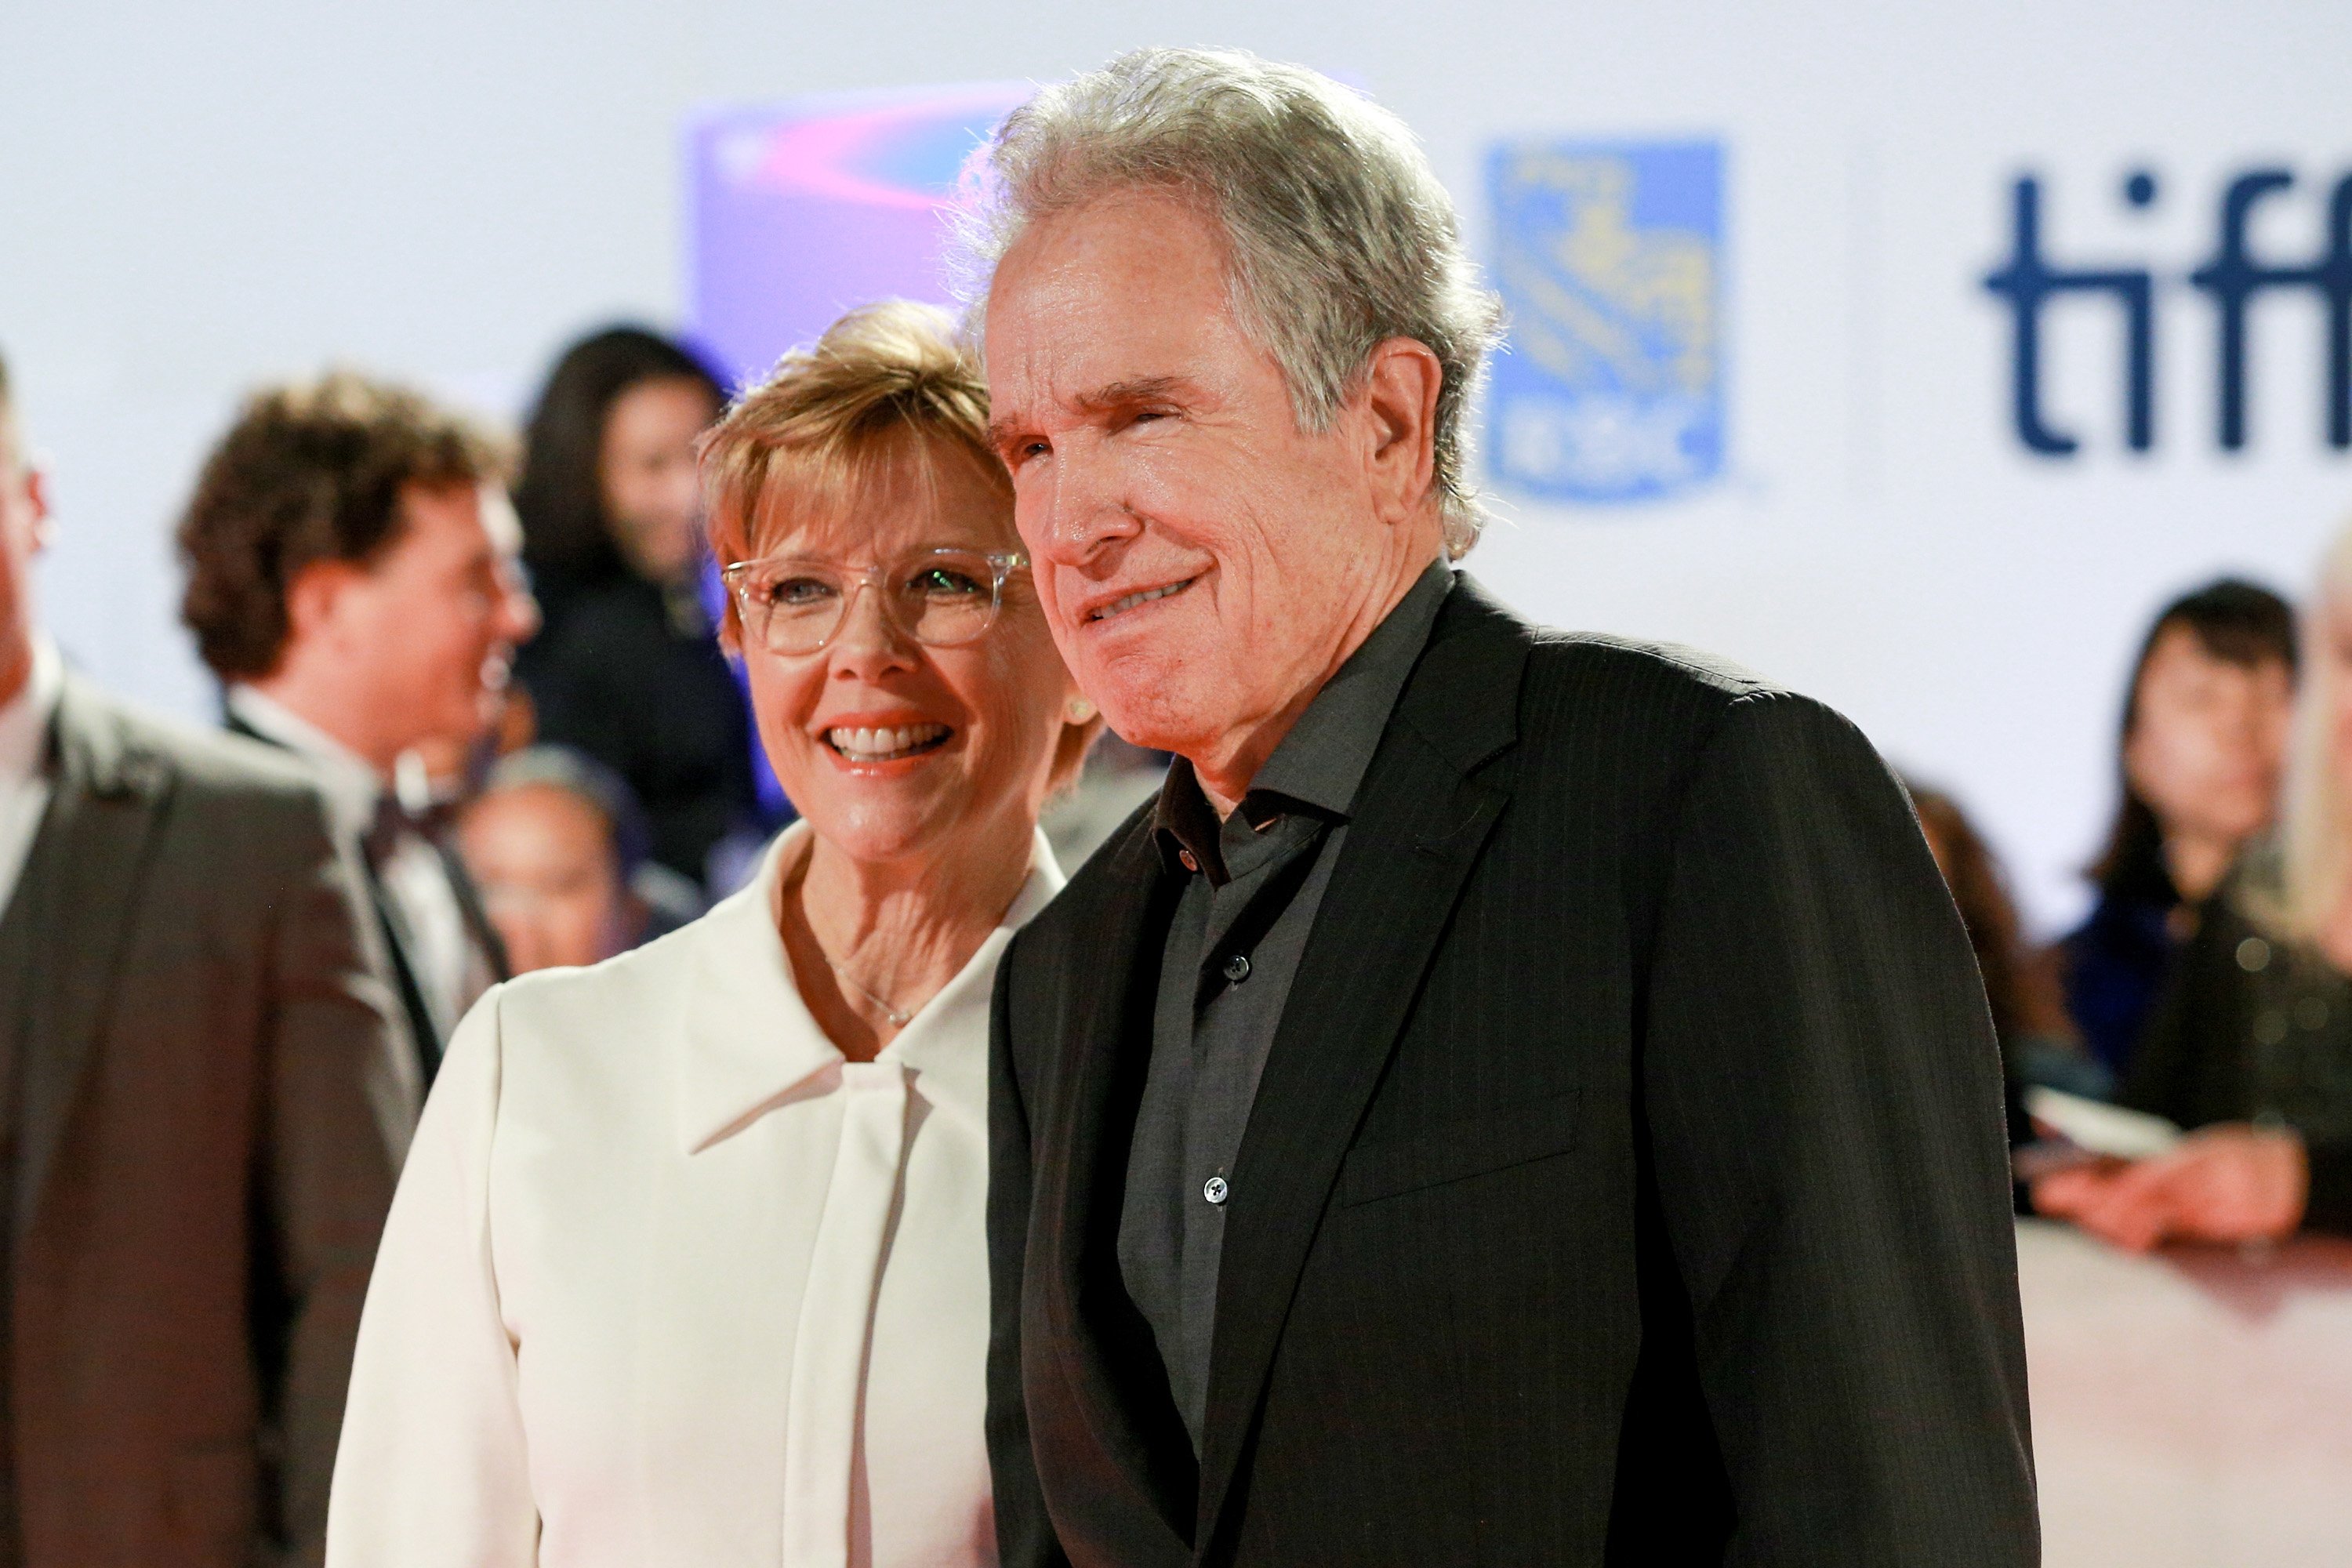 Annette Bening and Warren Beatty attend the 'Film Stars Don't Die in Liverpool' premiere on September 12, 2017 in Toronto, Canada | Photo: Getty Images